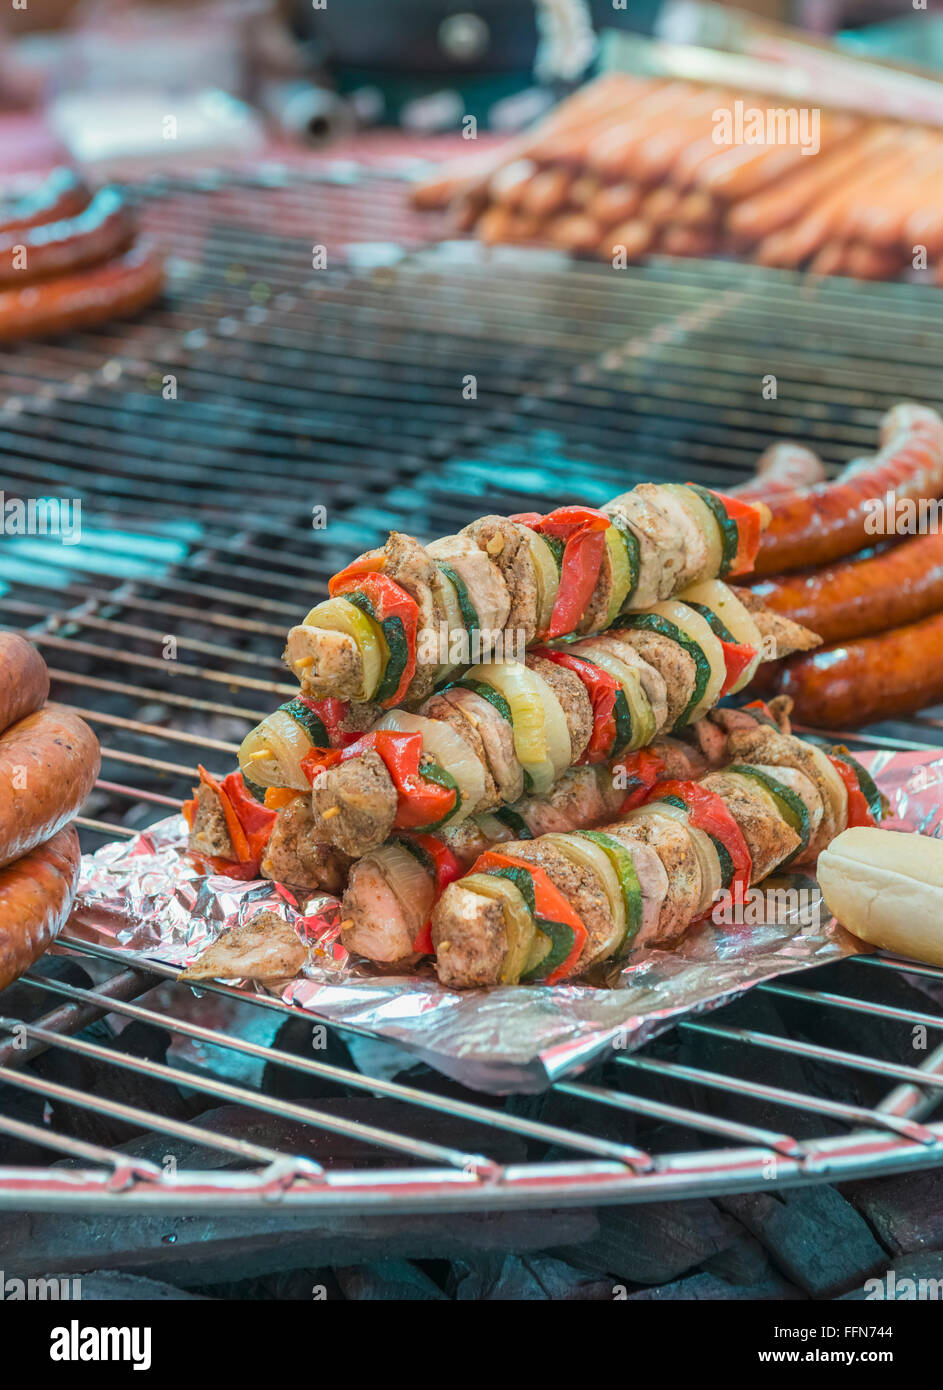 Sausages and kebabs on display on a grill in the old town market in Ghent, Belgium, Europe Stock Photo